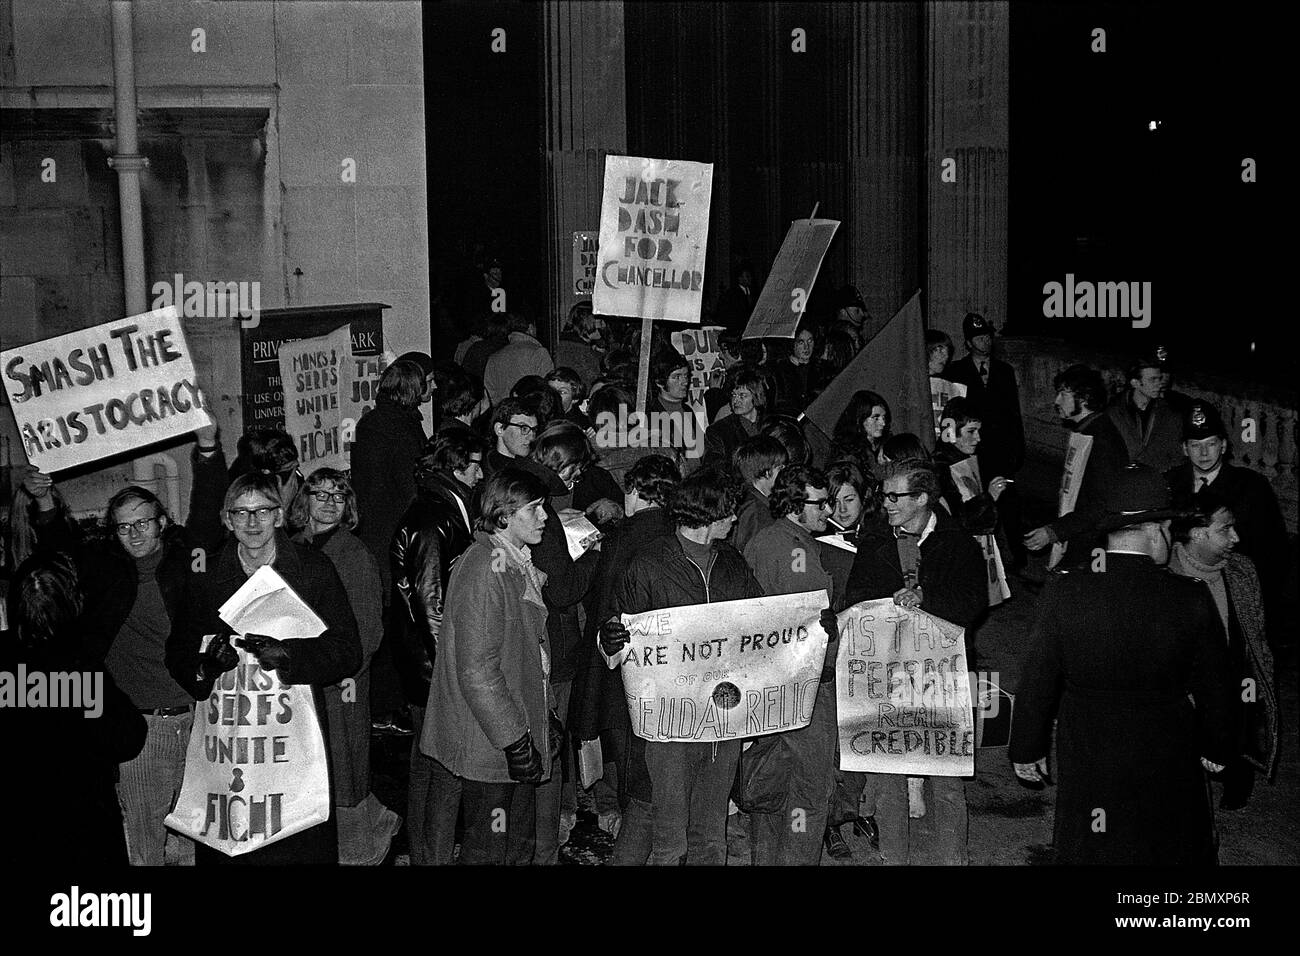 Student demonstrators protesting against the Duke of Beaufort being Bristol University’s Chancellor picket outside the Victoria Rooms as he arrives for Op Soc’s Gala Performance of Offenbachs “La Grande-Duchesse de Gerolstein” on 14 February 1969.  Some placards called for the Duke to be replaced by Jack Dash, a communist trade union leader prominent in London Dock Strikes. Stock Photo